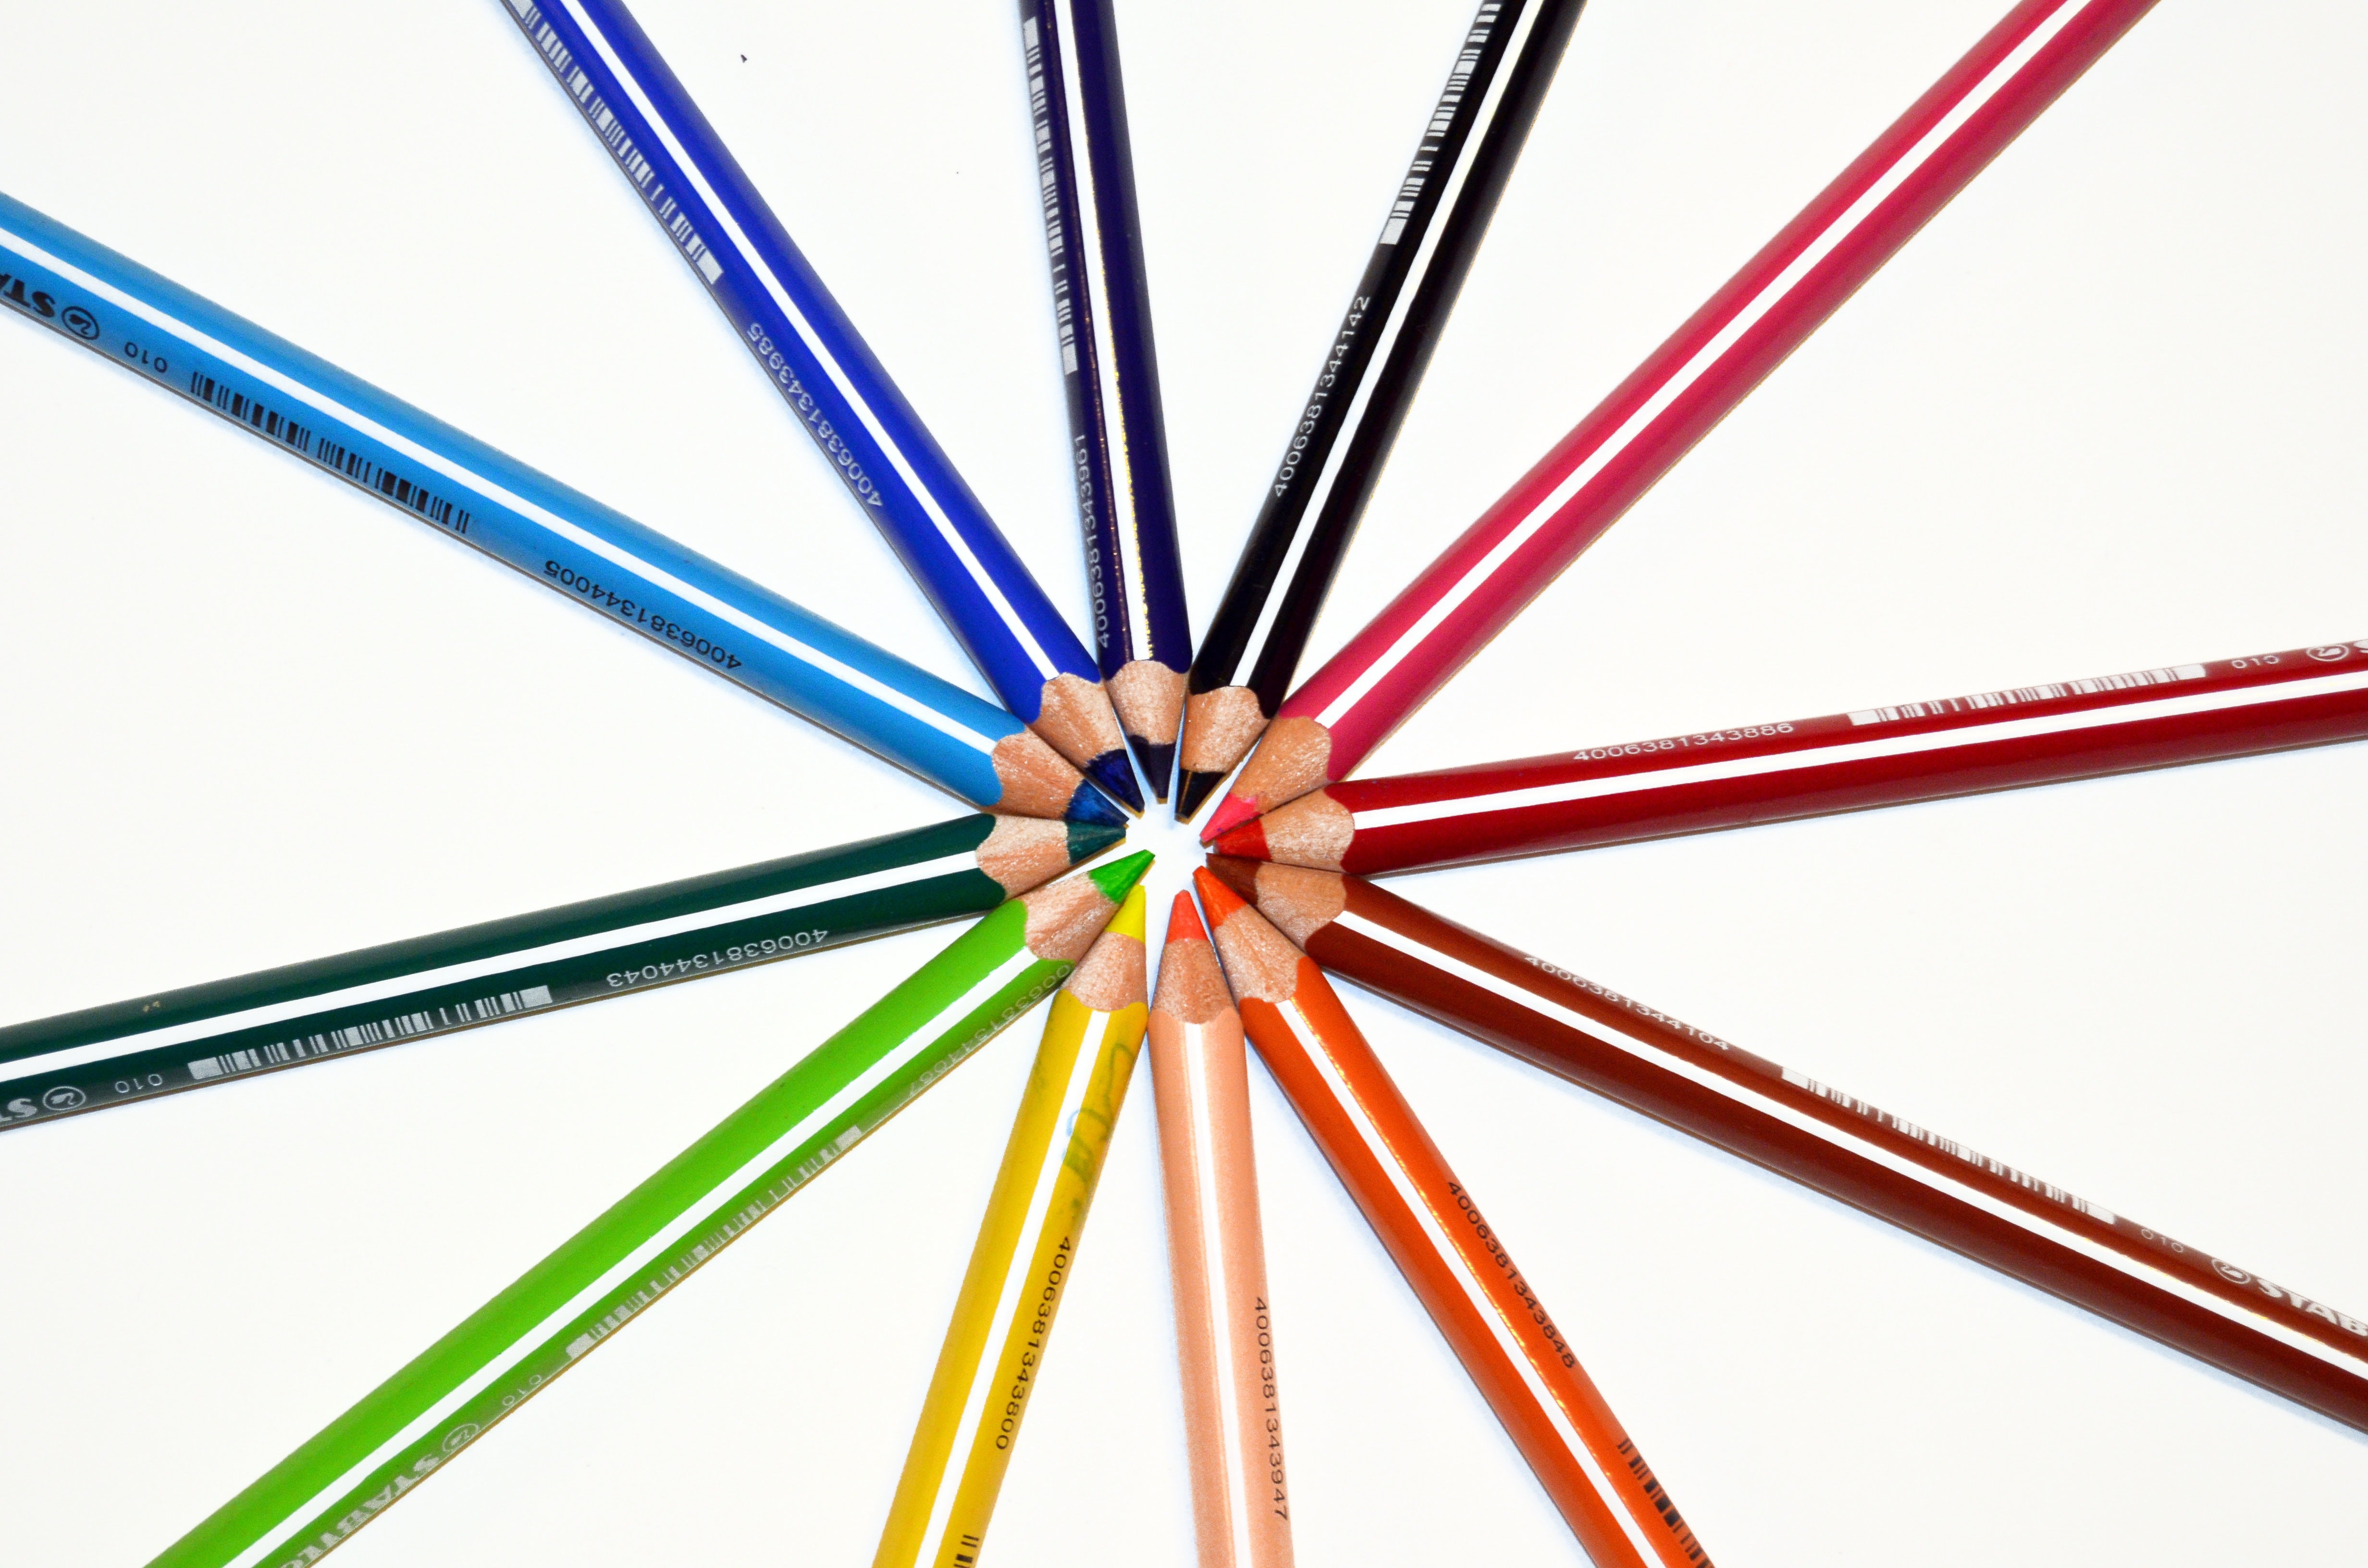 Orange Yellow Green Blue Red and Black Color Pencil, Art, Colored, Colored pencils, Colorful, HQ Photo